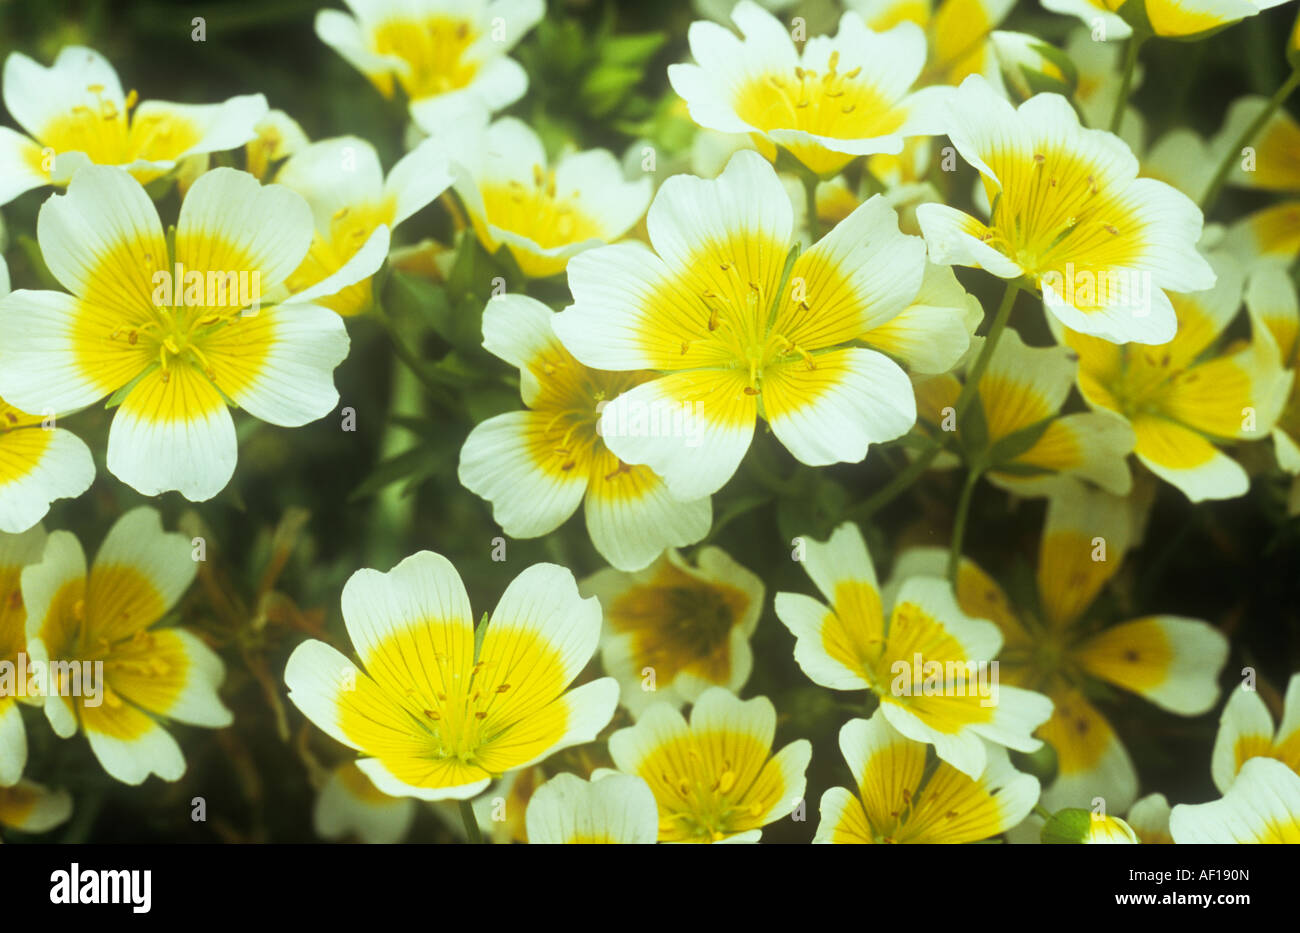 Cluster of yellow and white flowerheads of hardy annual border or edging plant Poached egg flower or Limnanthes douglasii Stock Photo